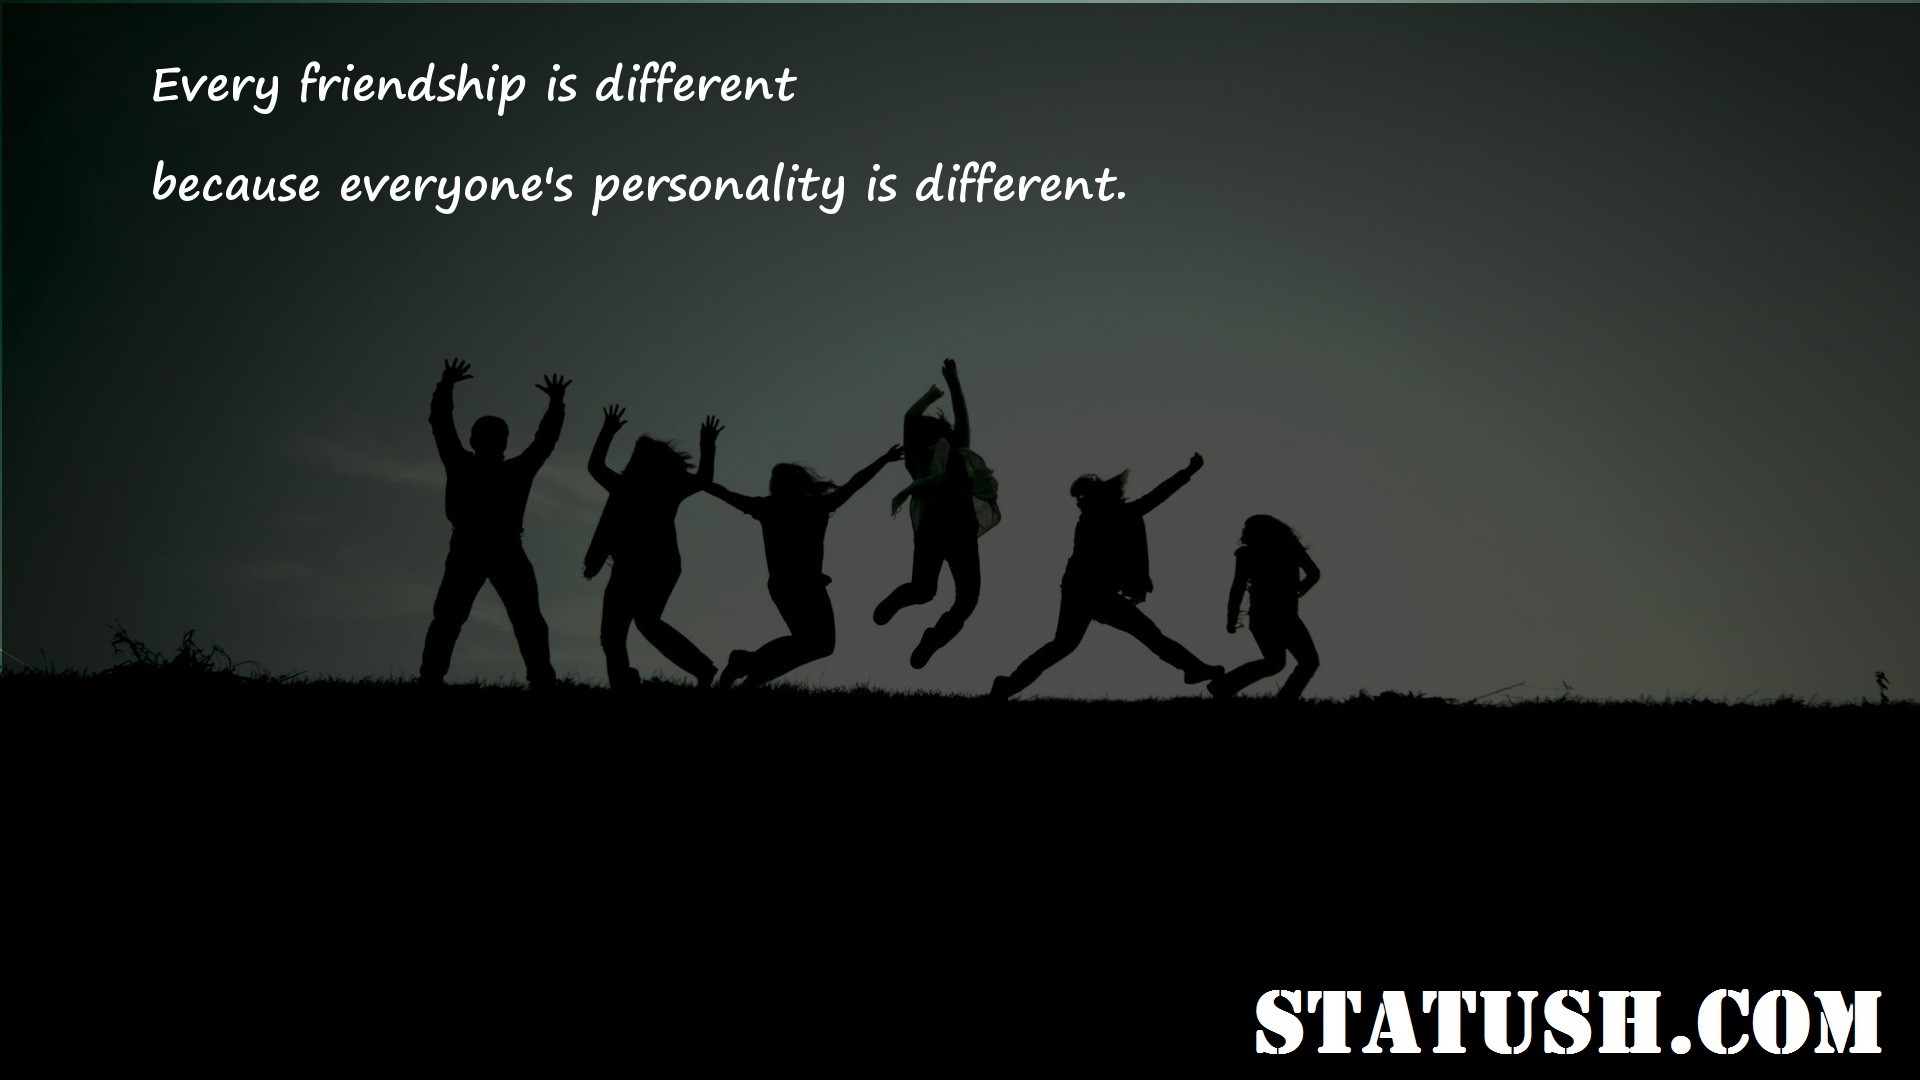 Every friendship is different - Friendship Quotes at statush.com